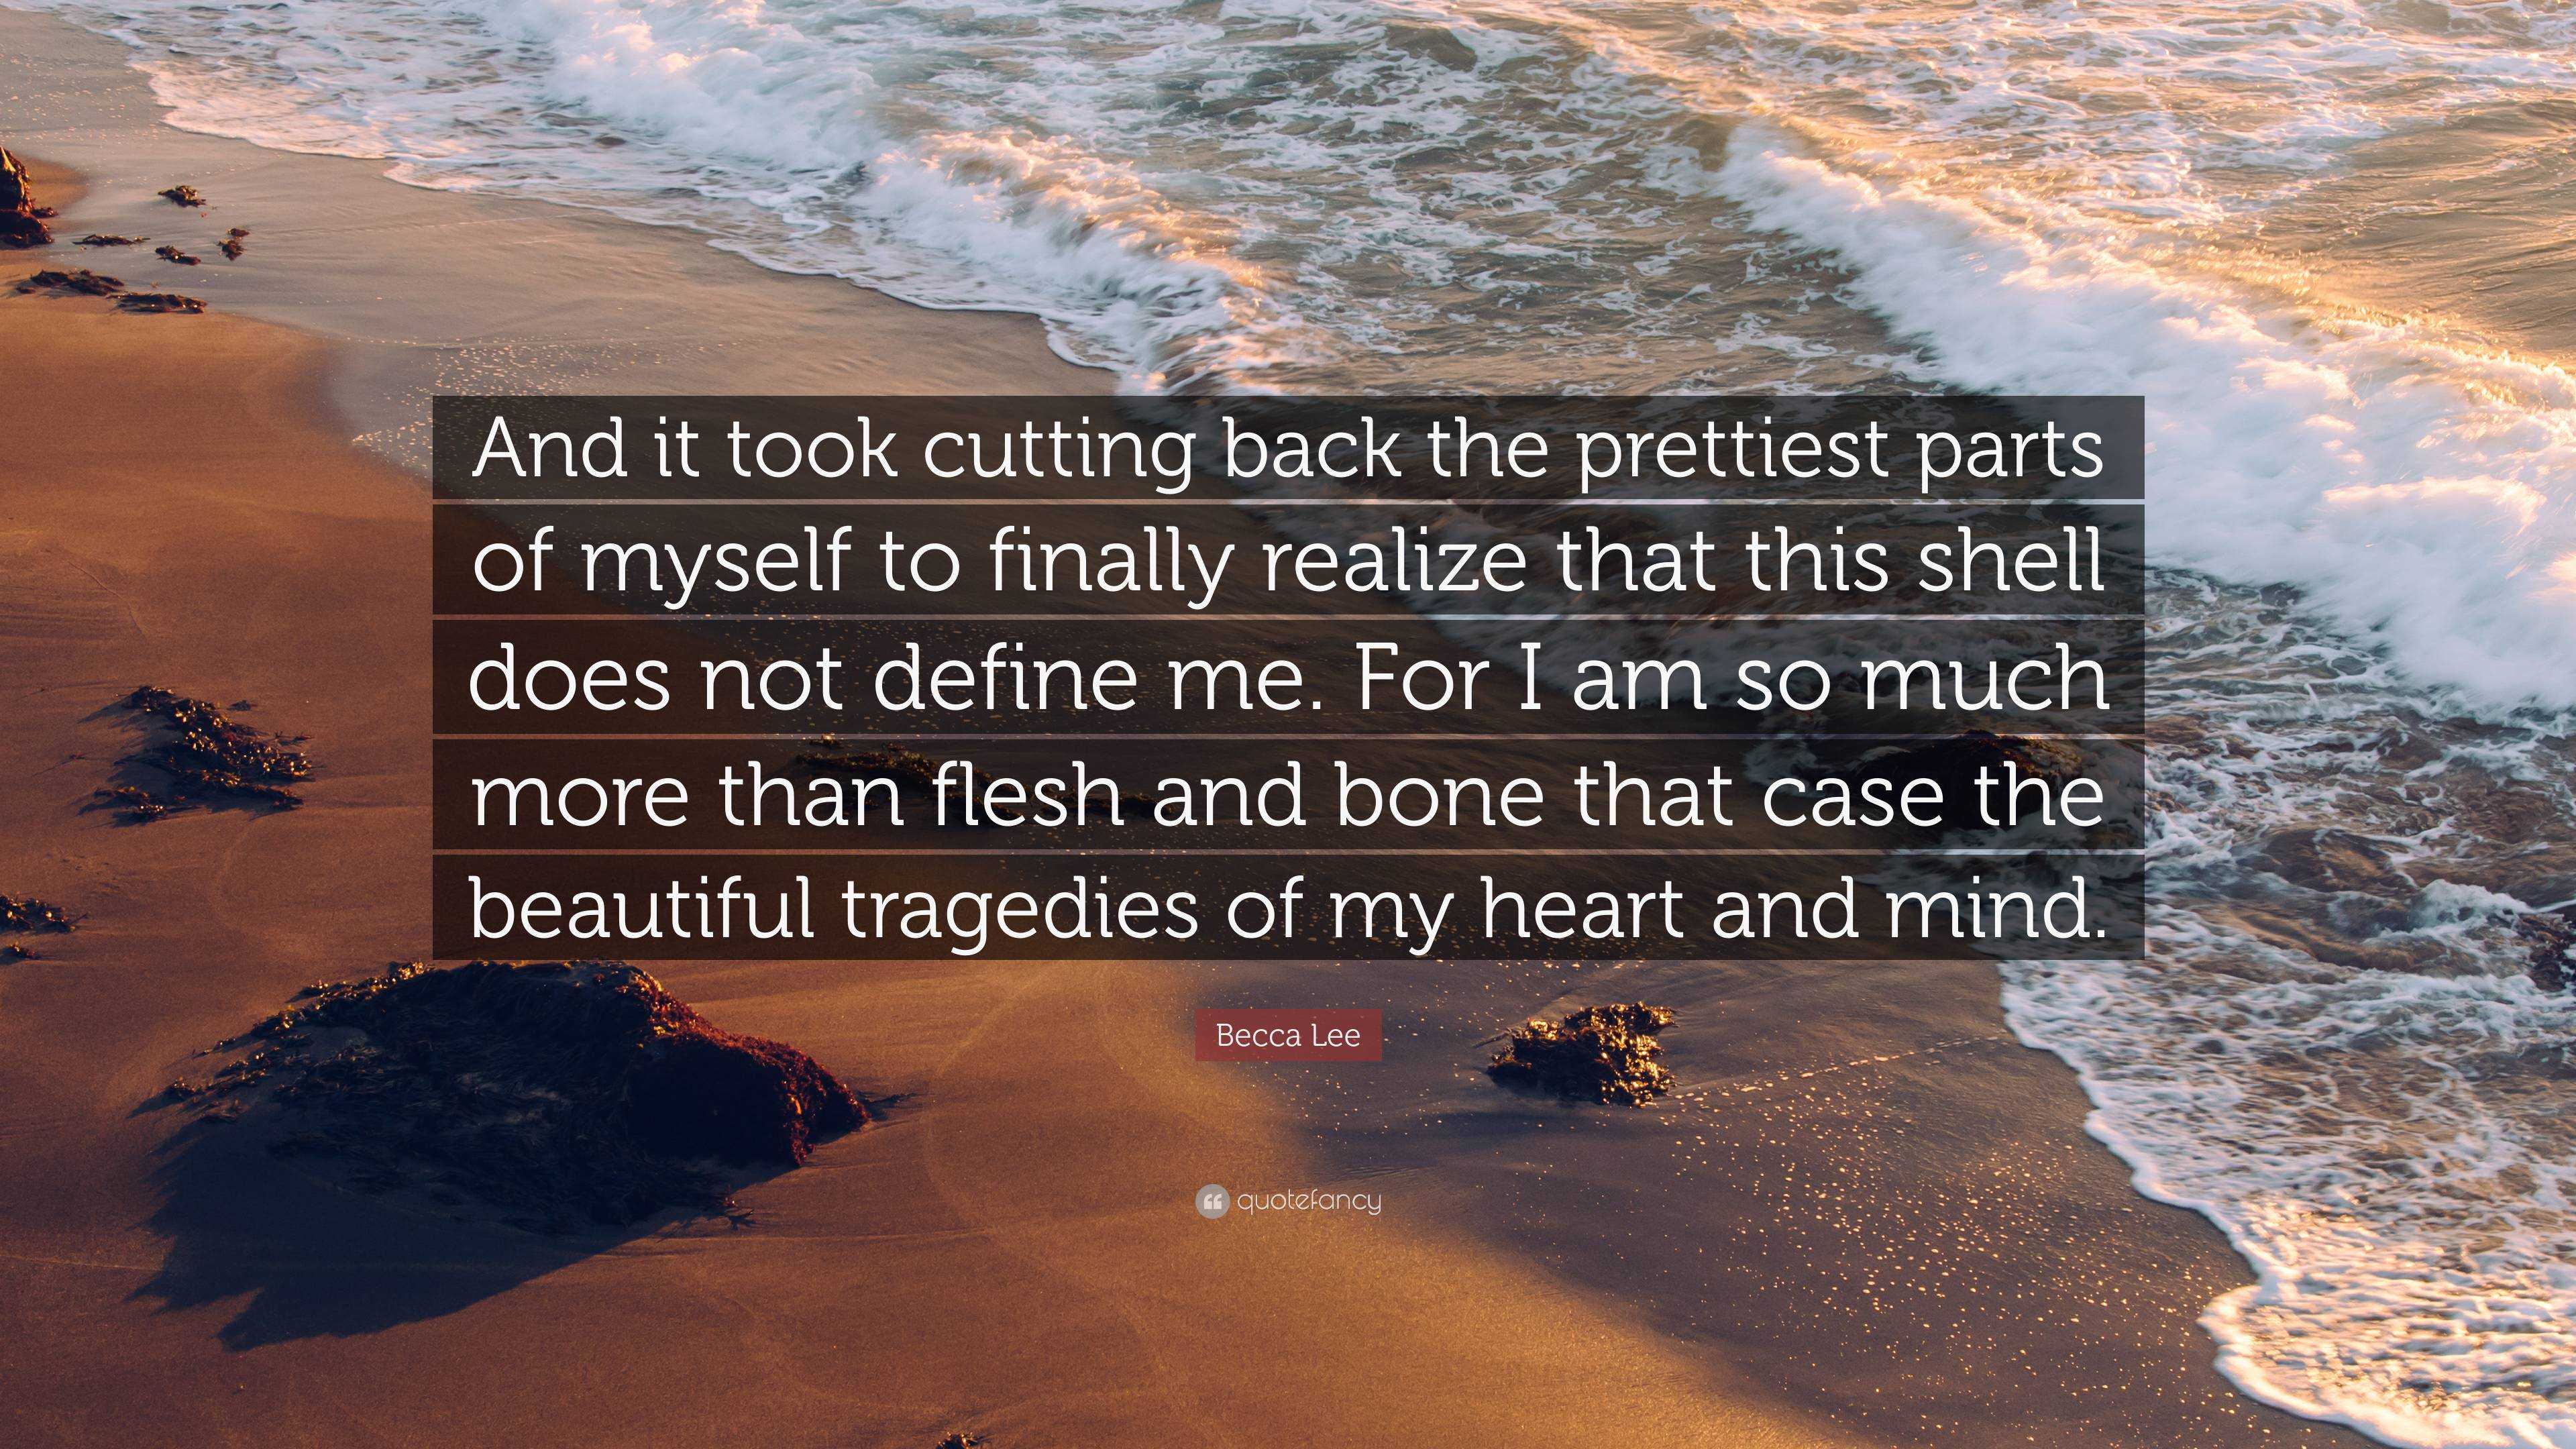 Becca Lee Quote: “And it took cutting back the prettiest parts of myself to  finally realize that this shell does not define me. For I am s...”